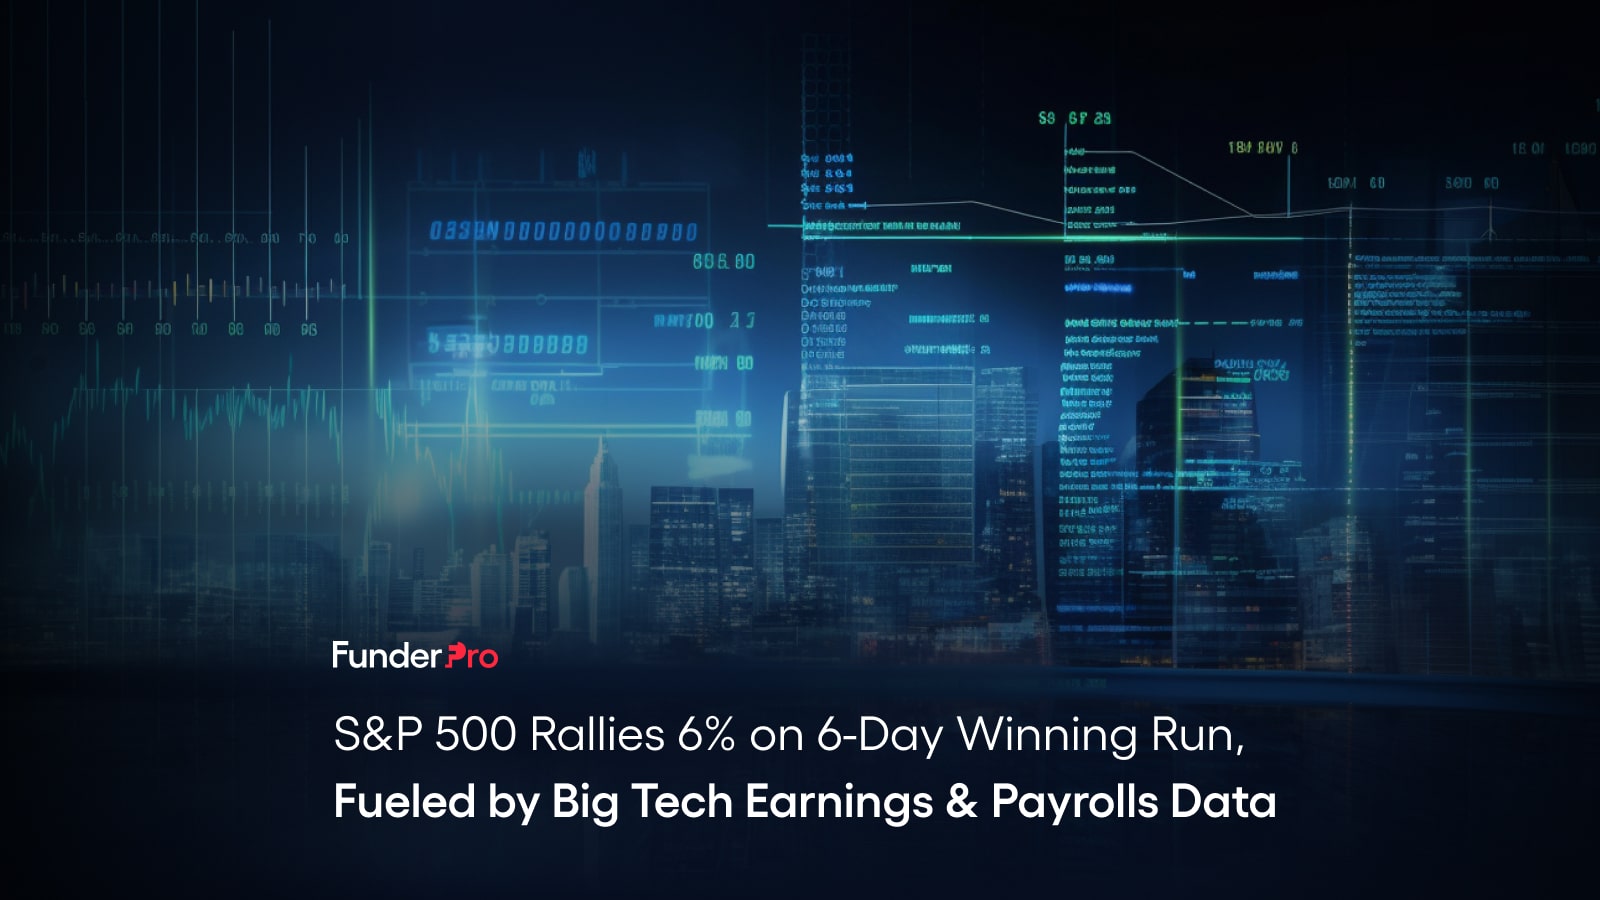 S&P 500 Rallies 6% on a 6-Day Winning Run, Fueled by Big Tech Earnings & Payrolls Data